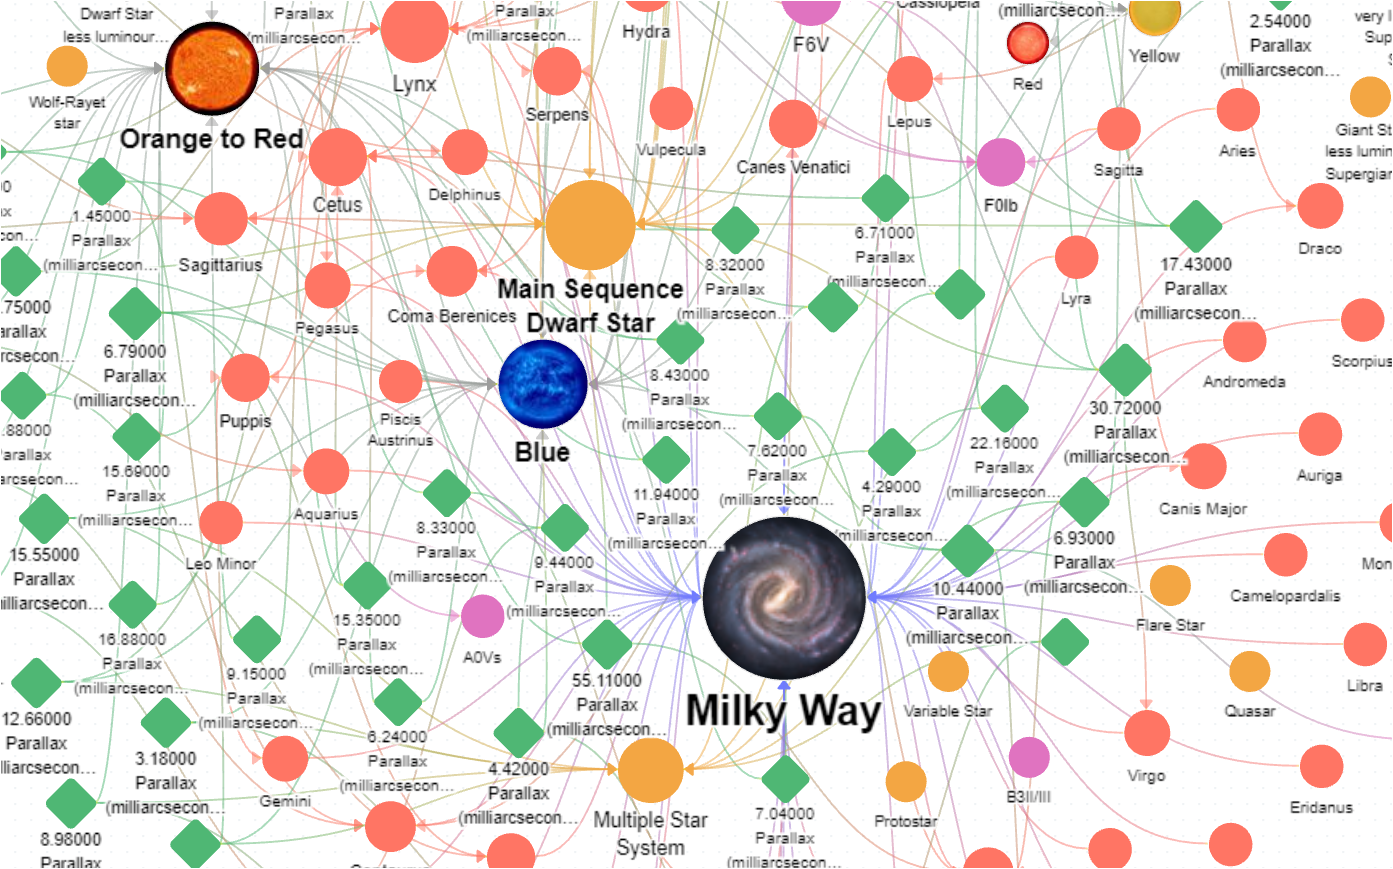 Knowledge graph of Earth’s planetary system and universe